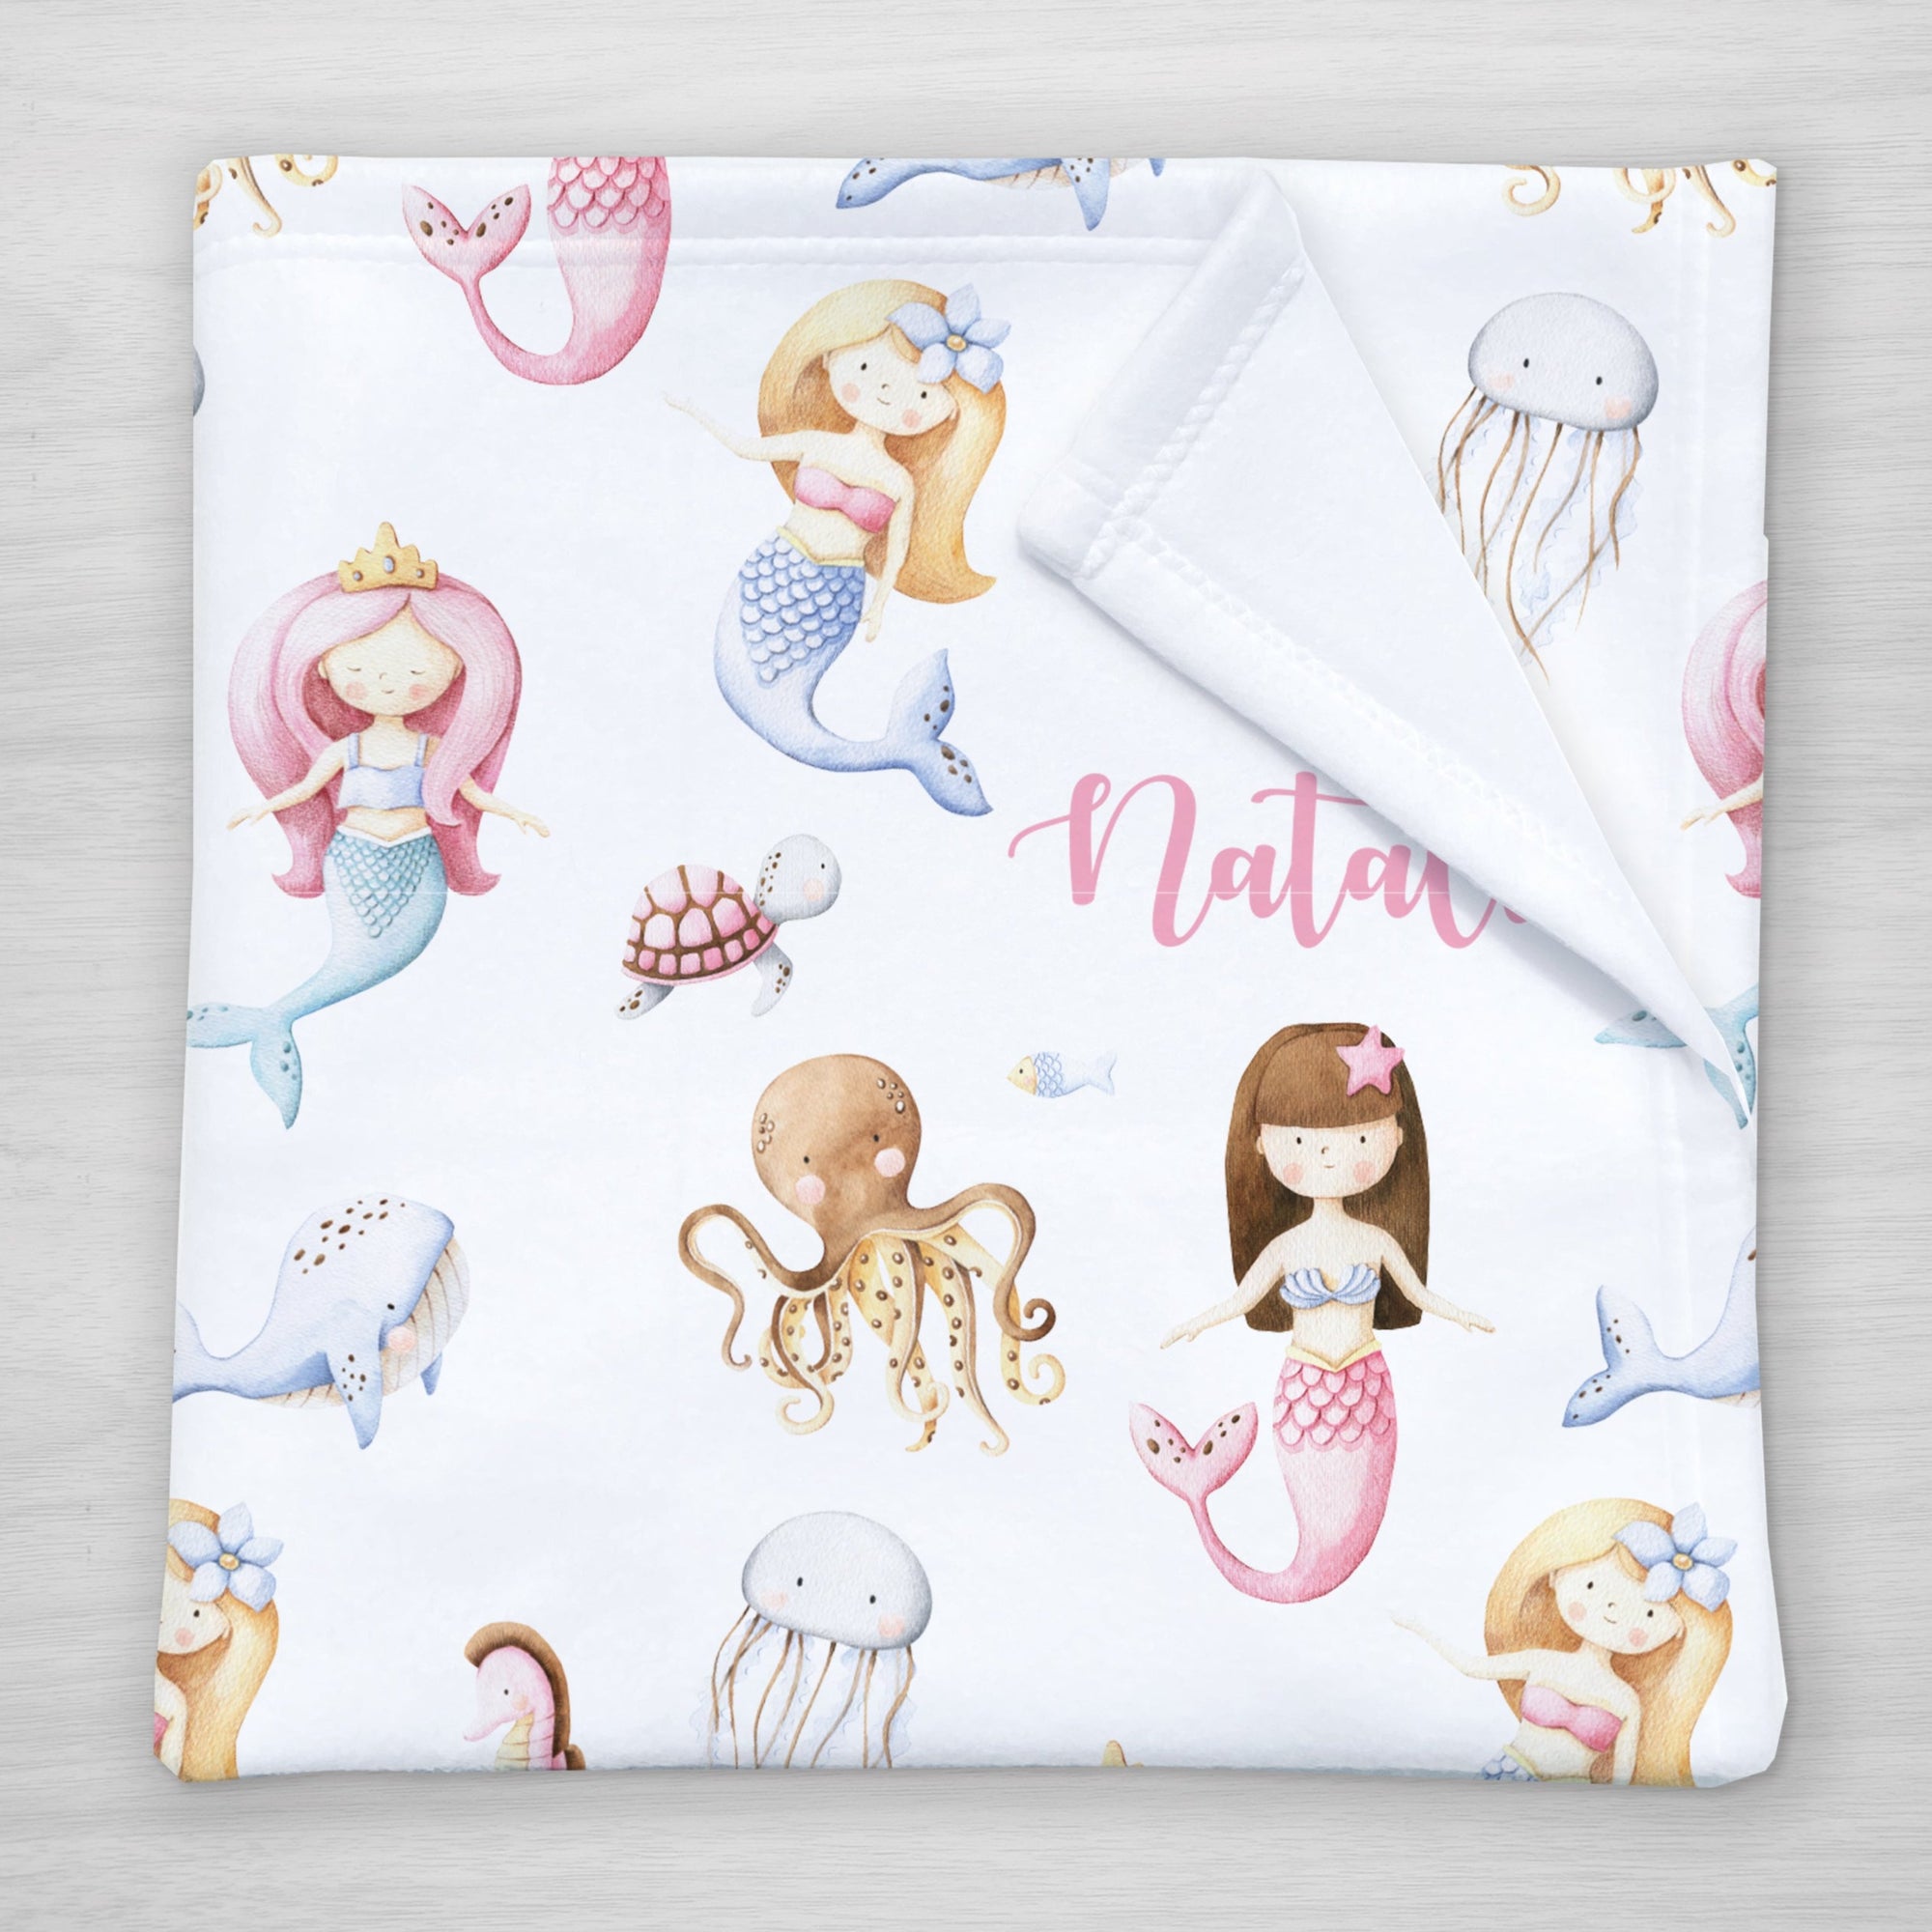 Mermaid personalized blanket with under the sea creatures and your baby's name. Makes a great gift for toddlers, too!